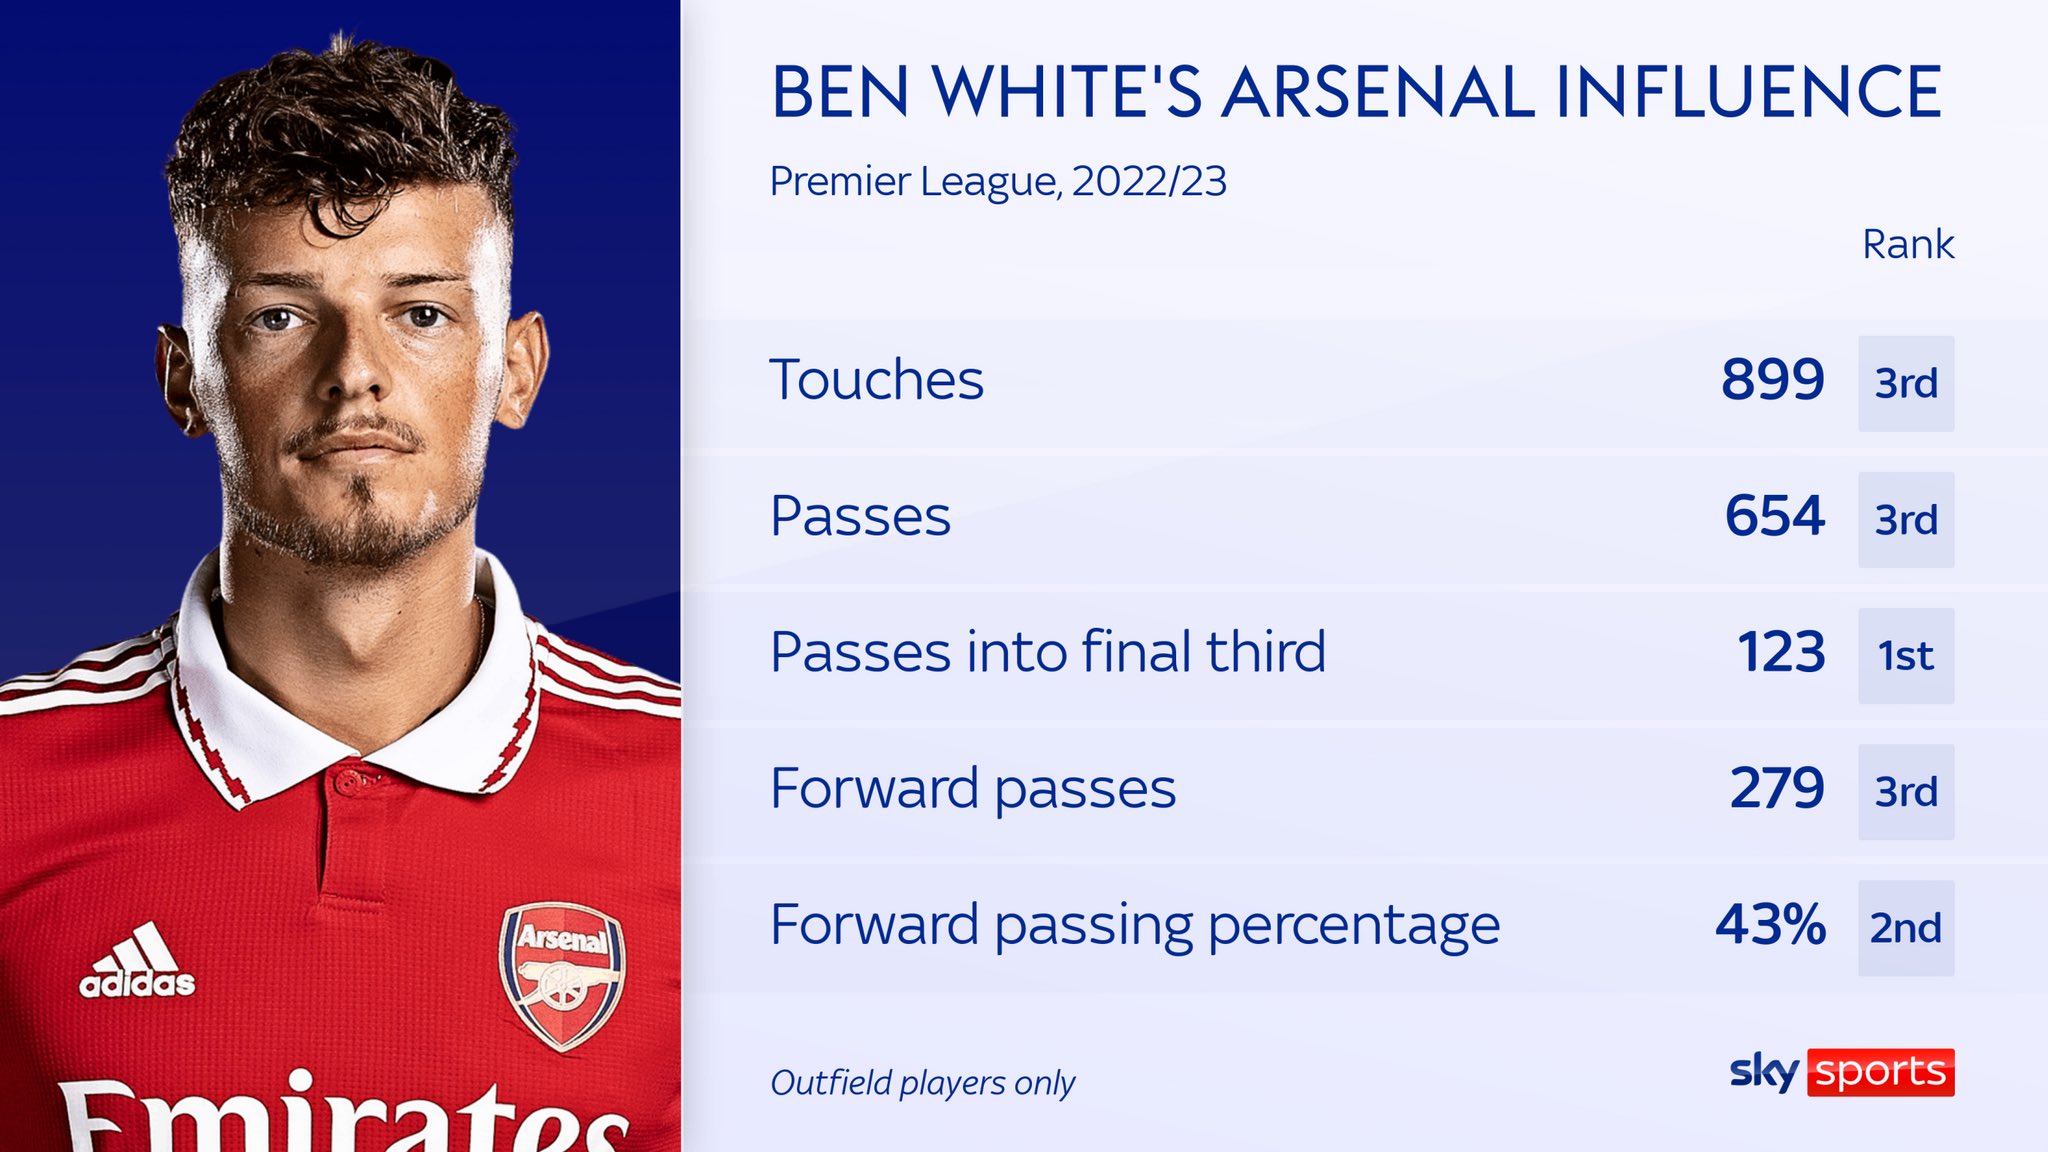 Most passes into final third and more Premier League stats highlight Ben Whites Arsenal influence